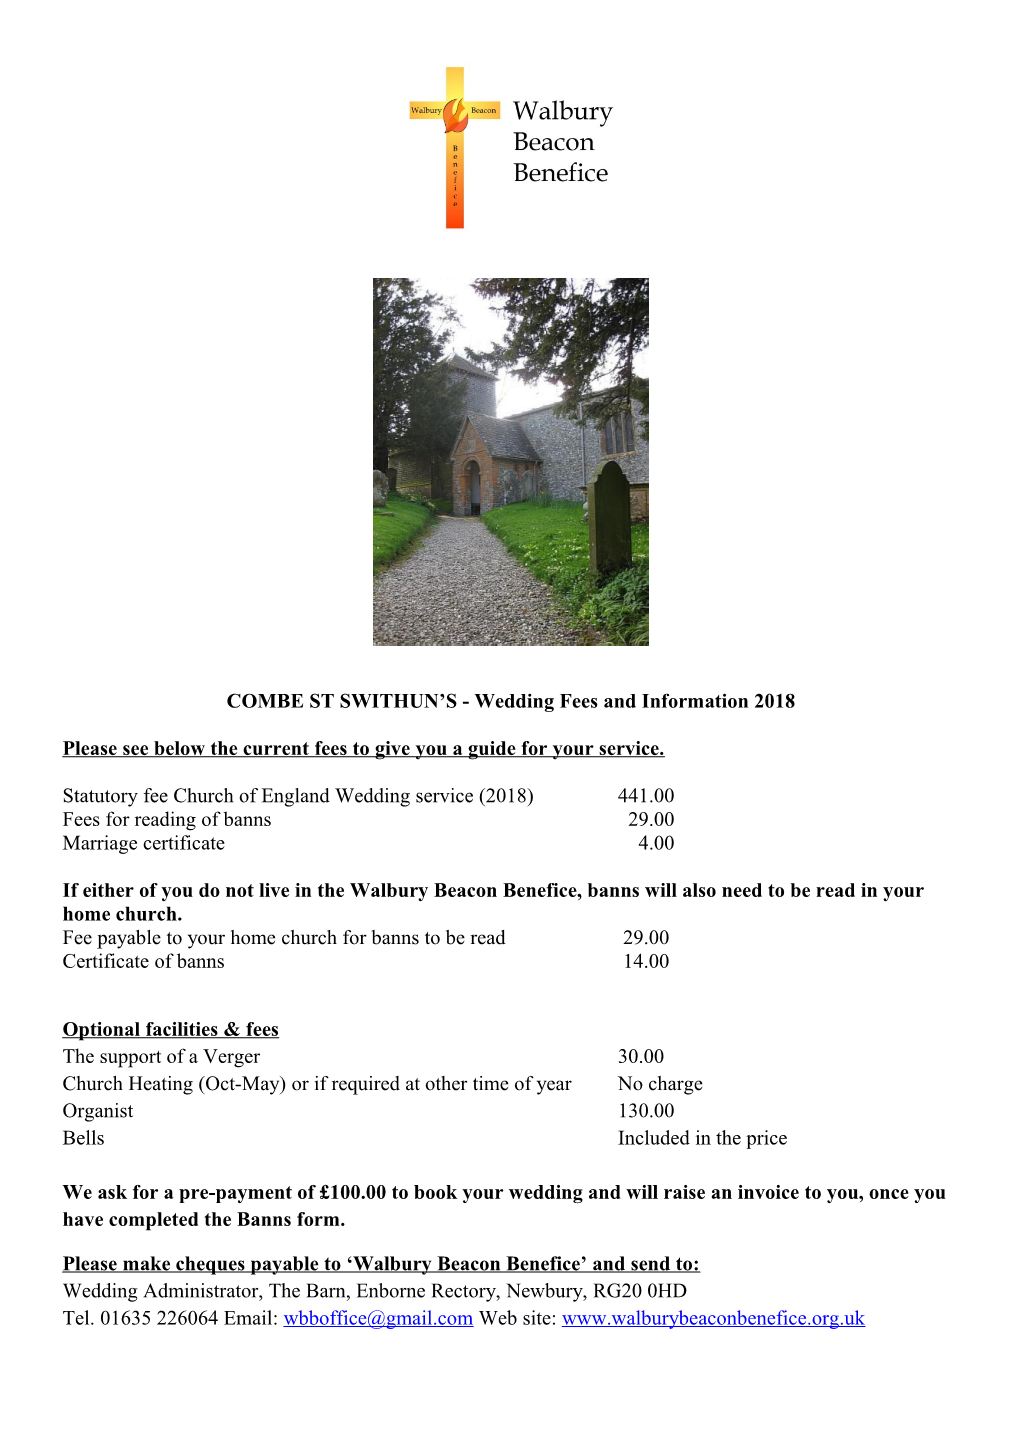 COMBE ST SWITHUN S - Wedding Fees and Information 2018